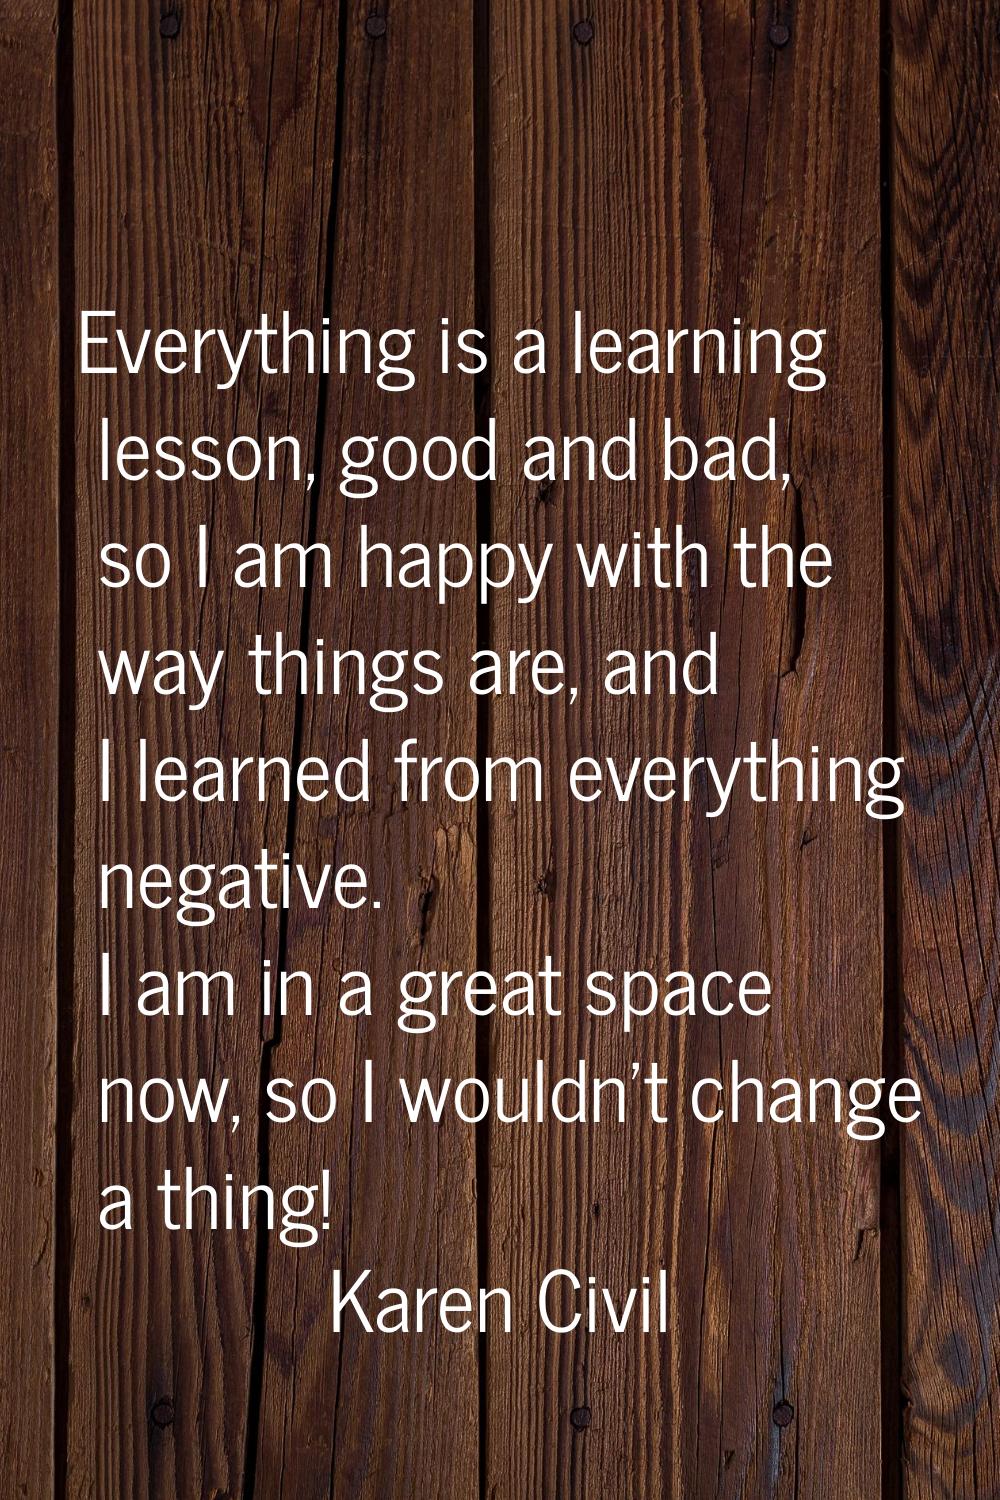 Everything is a learning lesson, good and bad, so I am happy with the way things are, and I learned